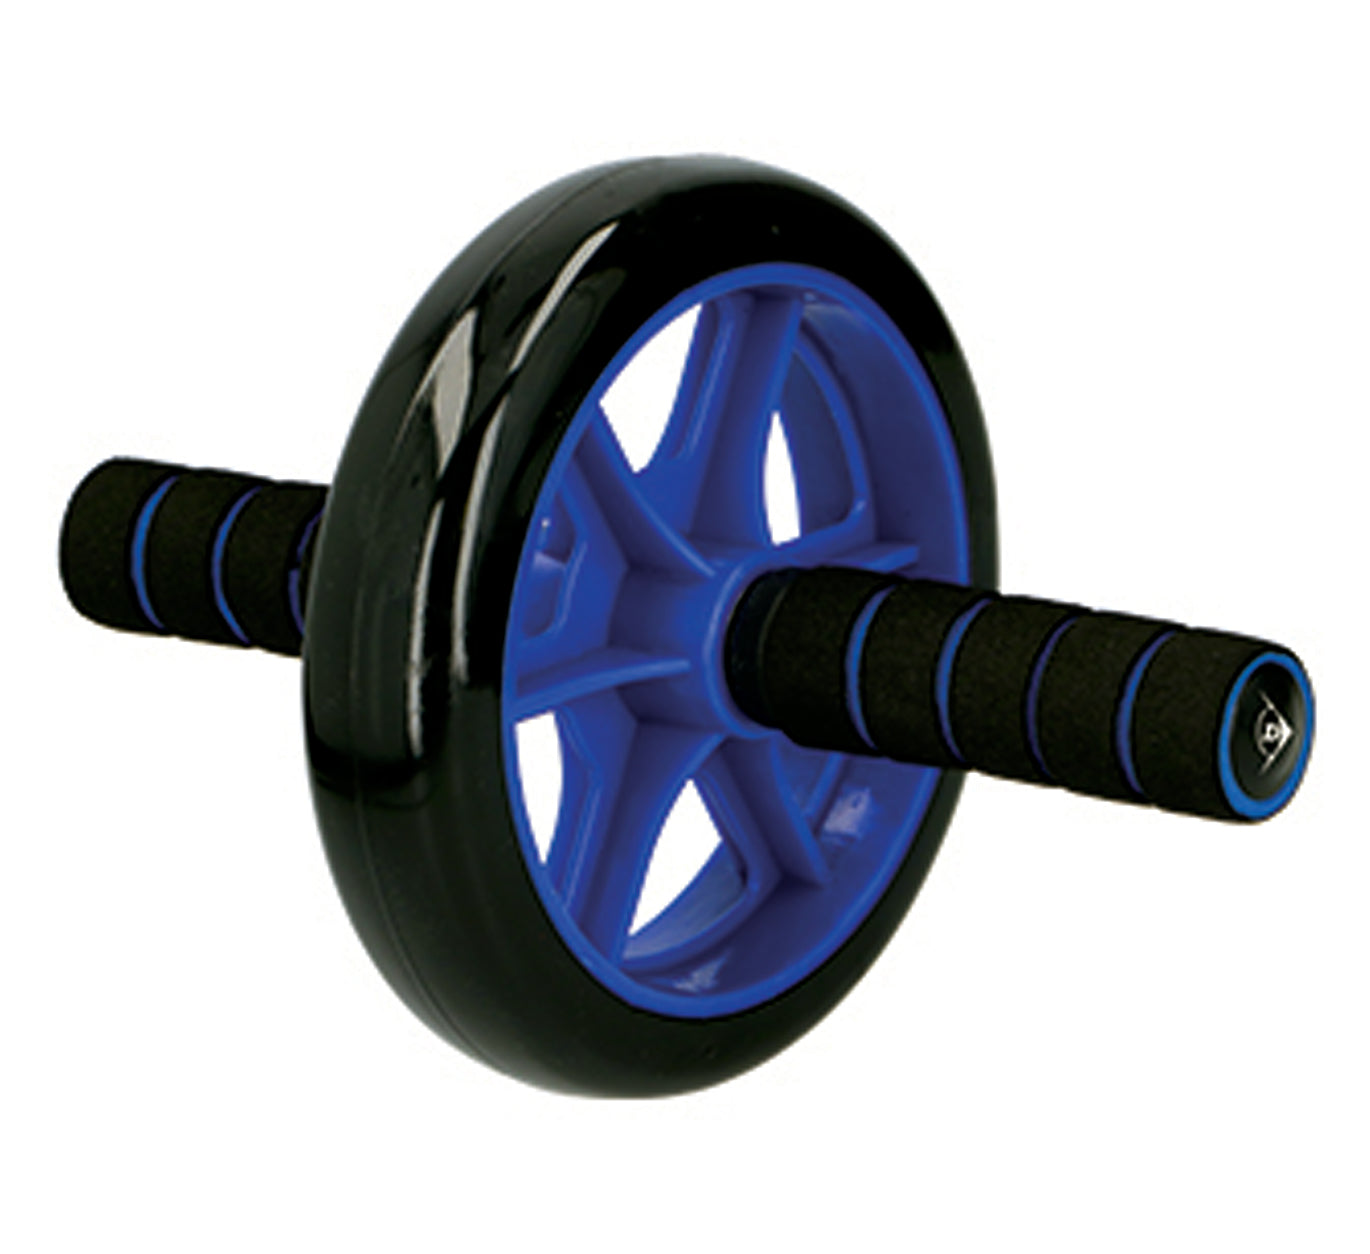 Dunlop Single Abs Training Wheel Fitness Exercise